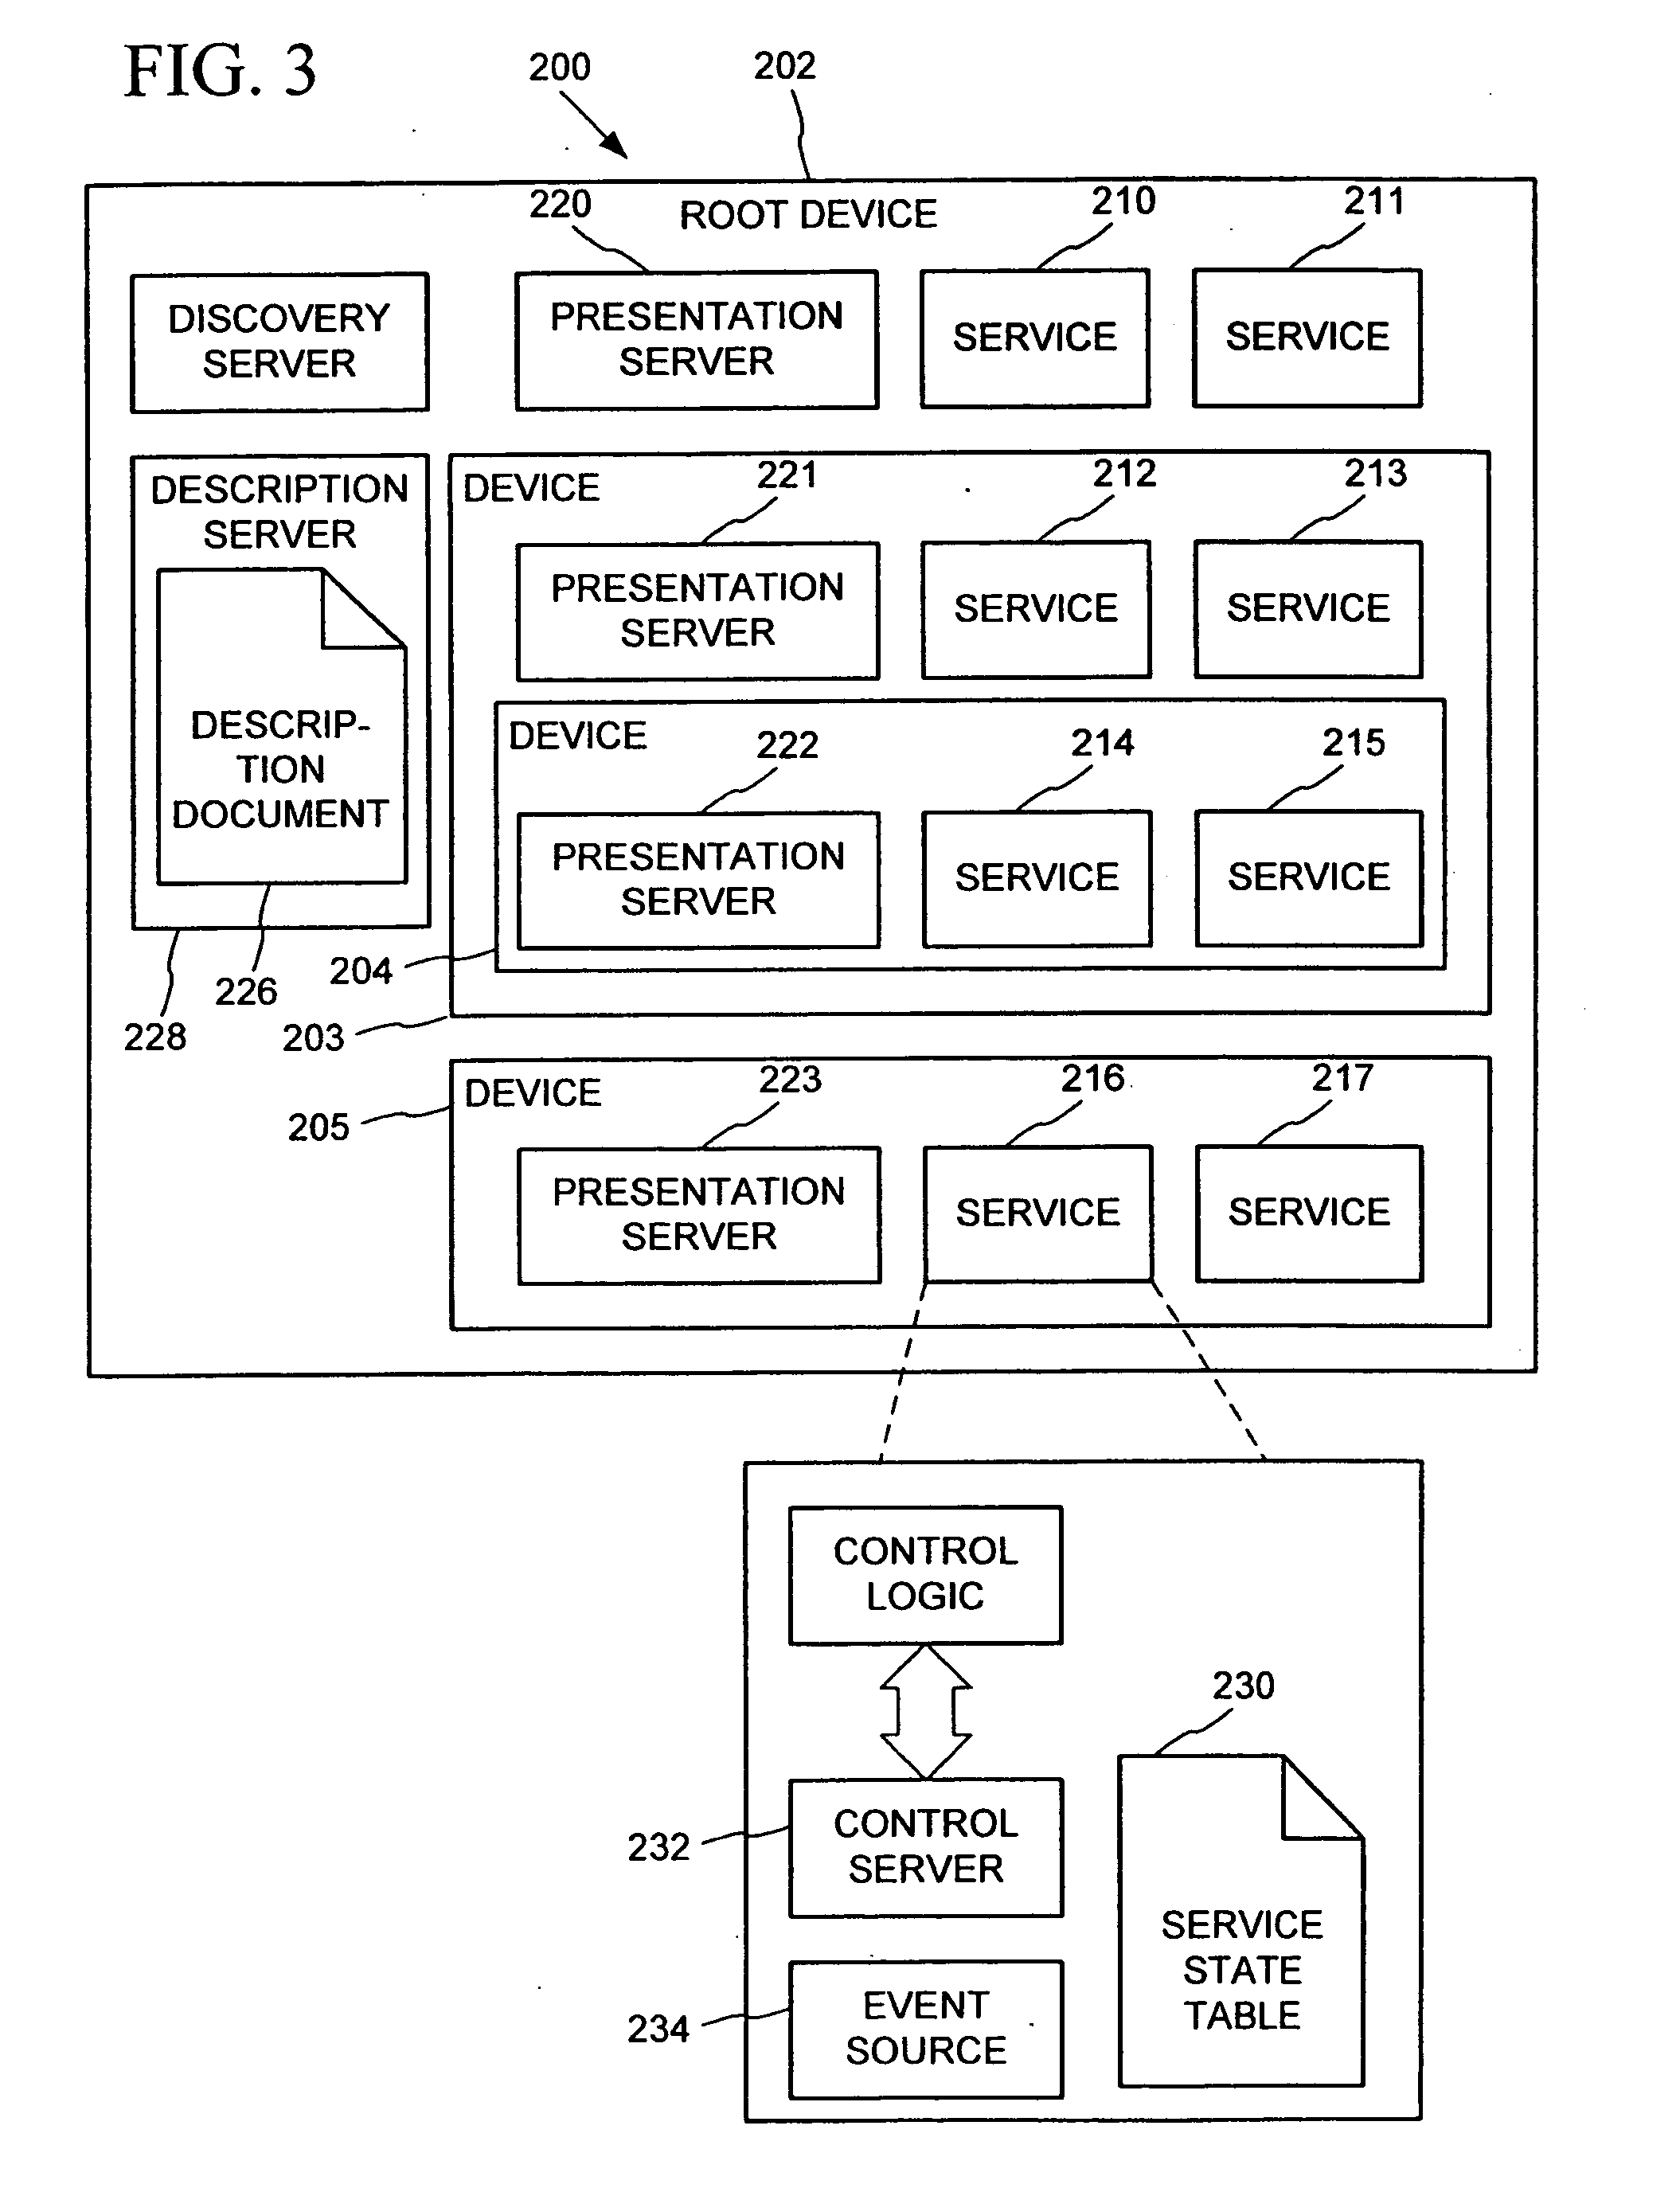 Dynamic self-configuration for ad hoc peer networking